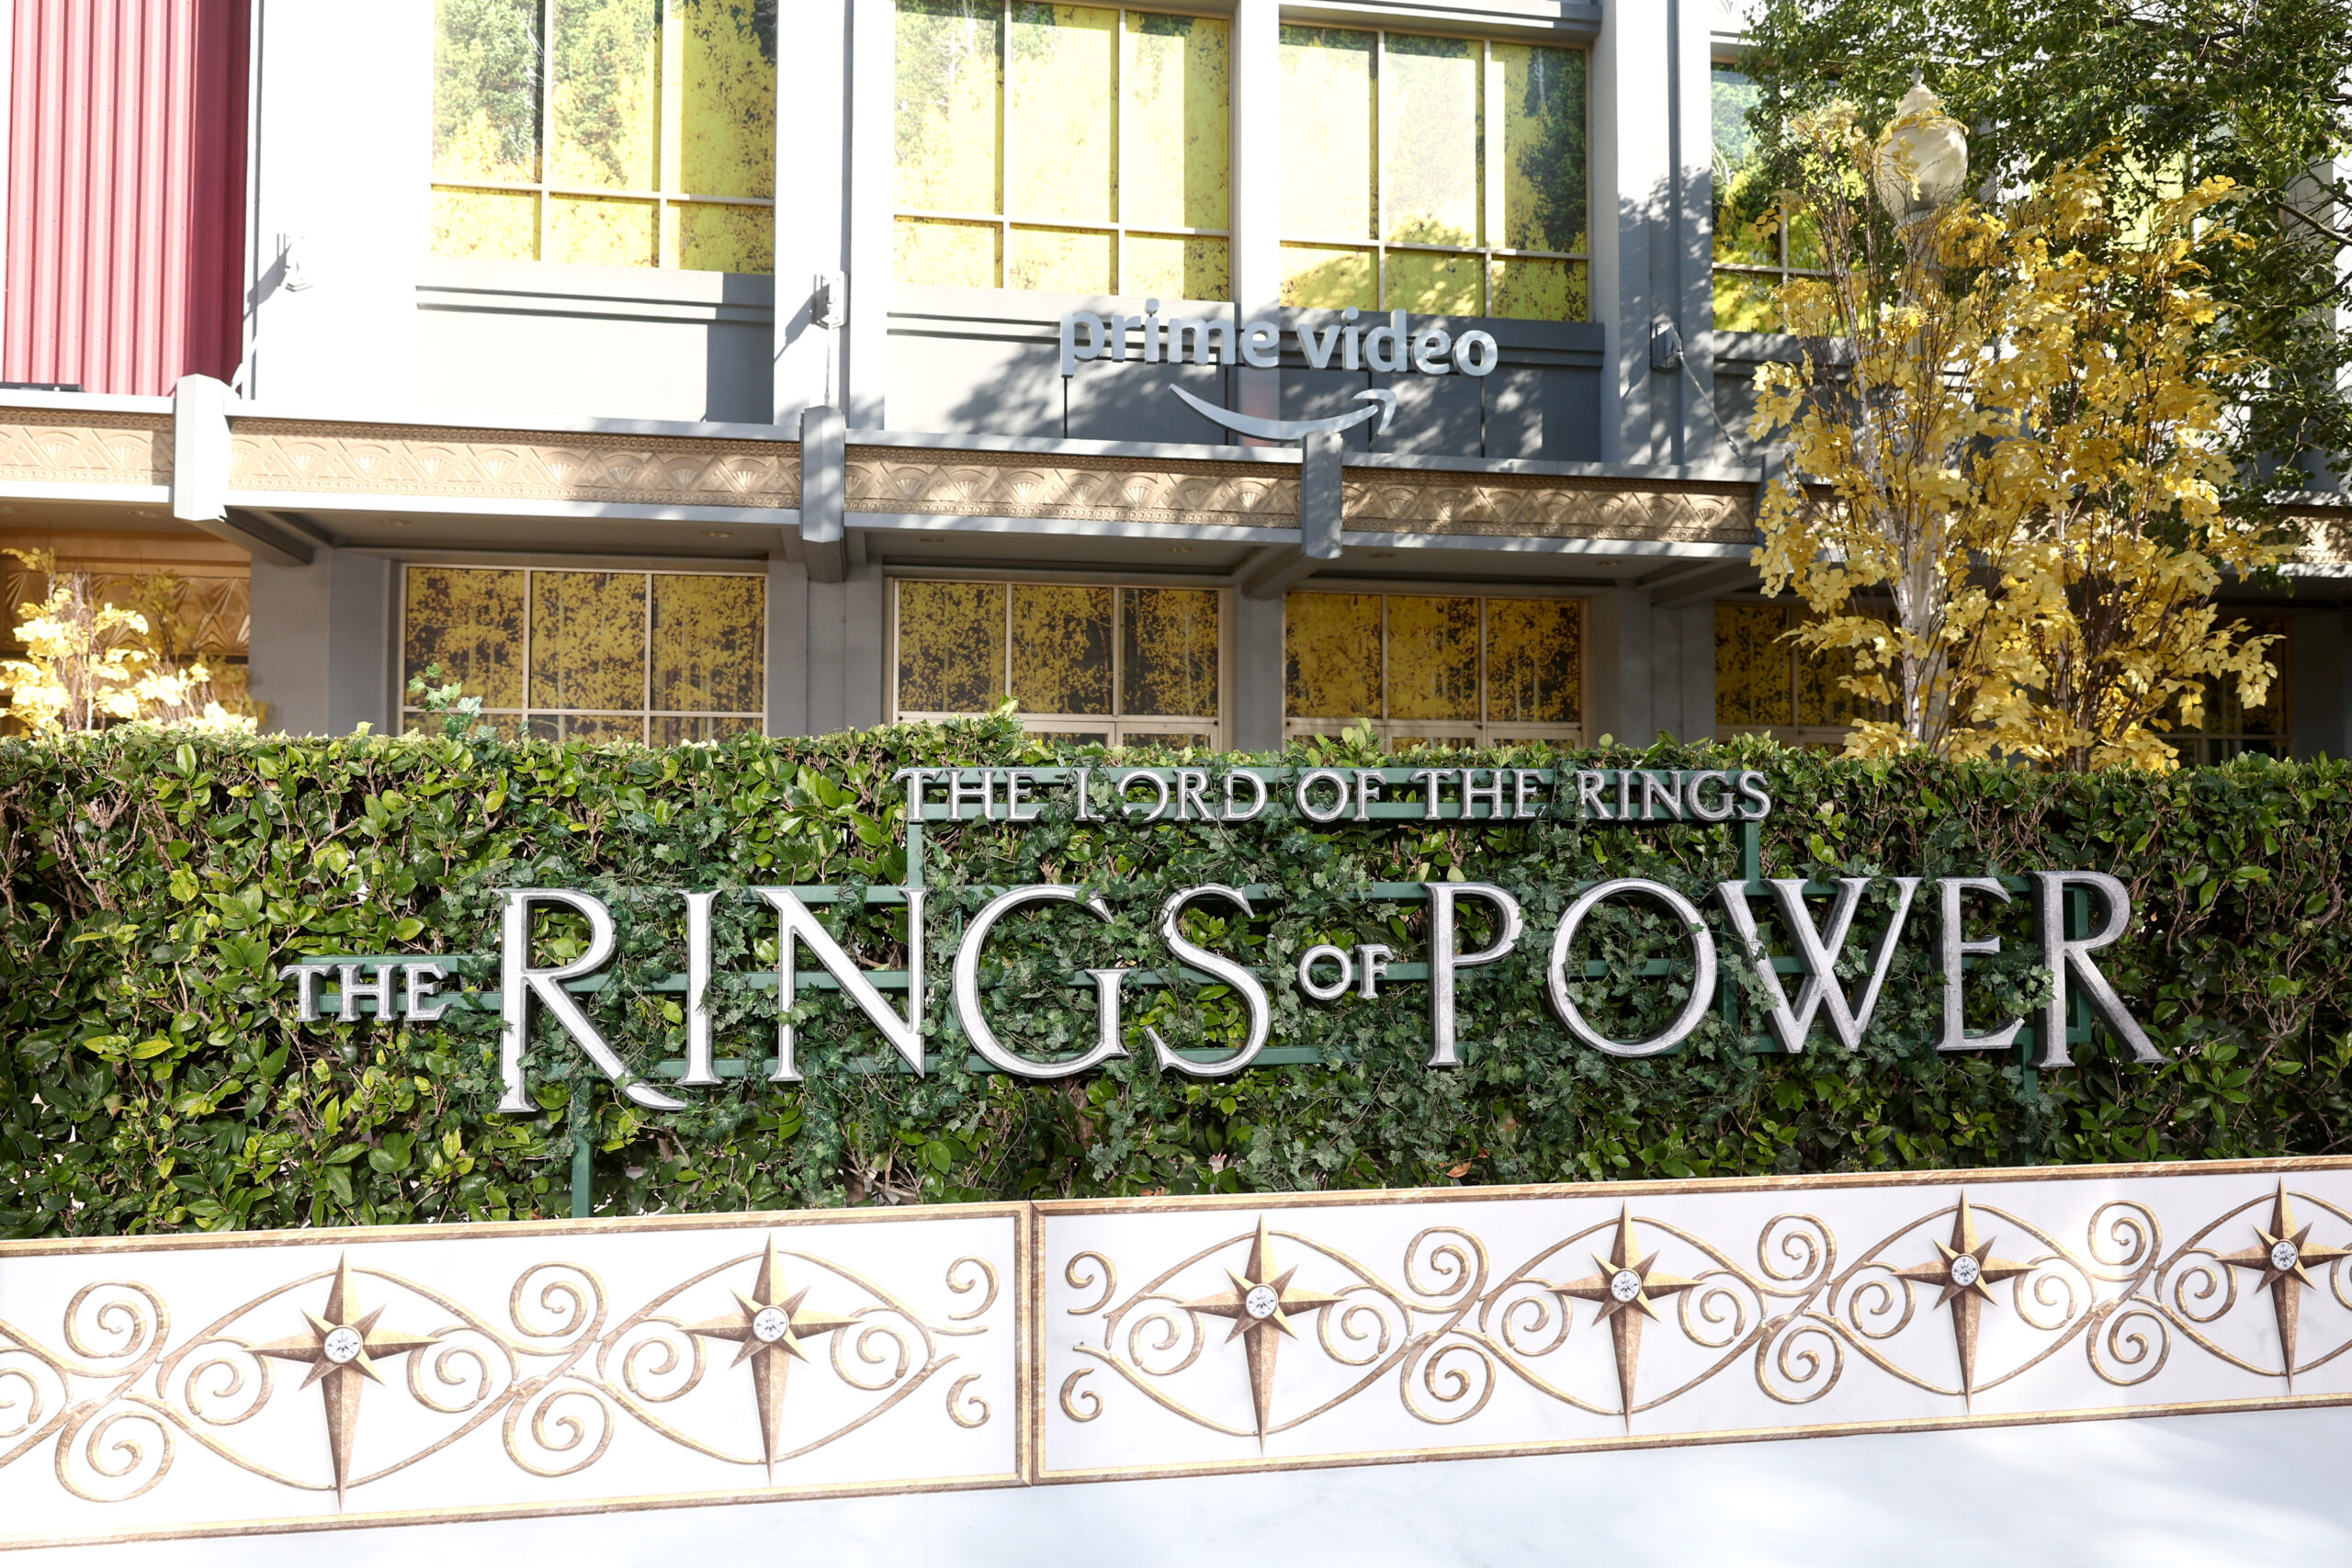 Rings of Power Producer Discusses Timelessness of Tolkien's Tale - LAmag -  Culture, Food, Fashion, News & Los Angeles